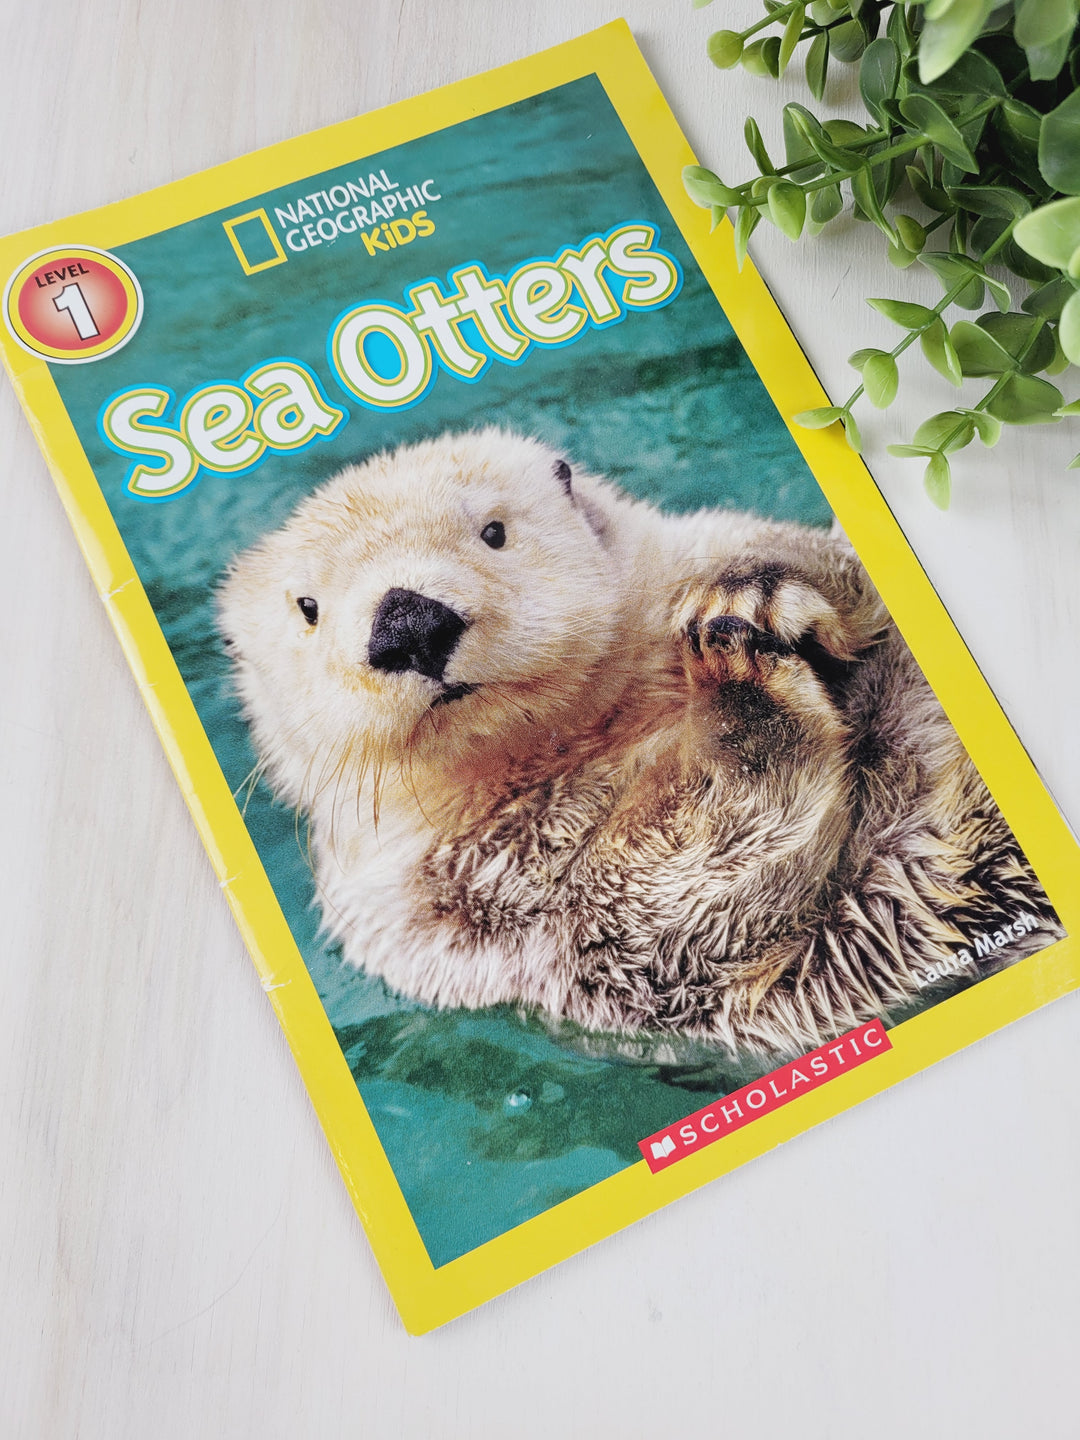 NATIONAL GEOGRAPHIC SEA OTTERS LEVEL 1 READER BOOK EUC